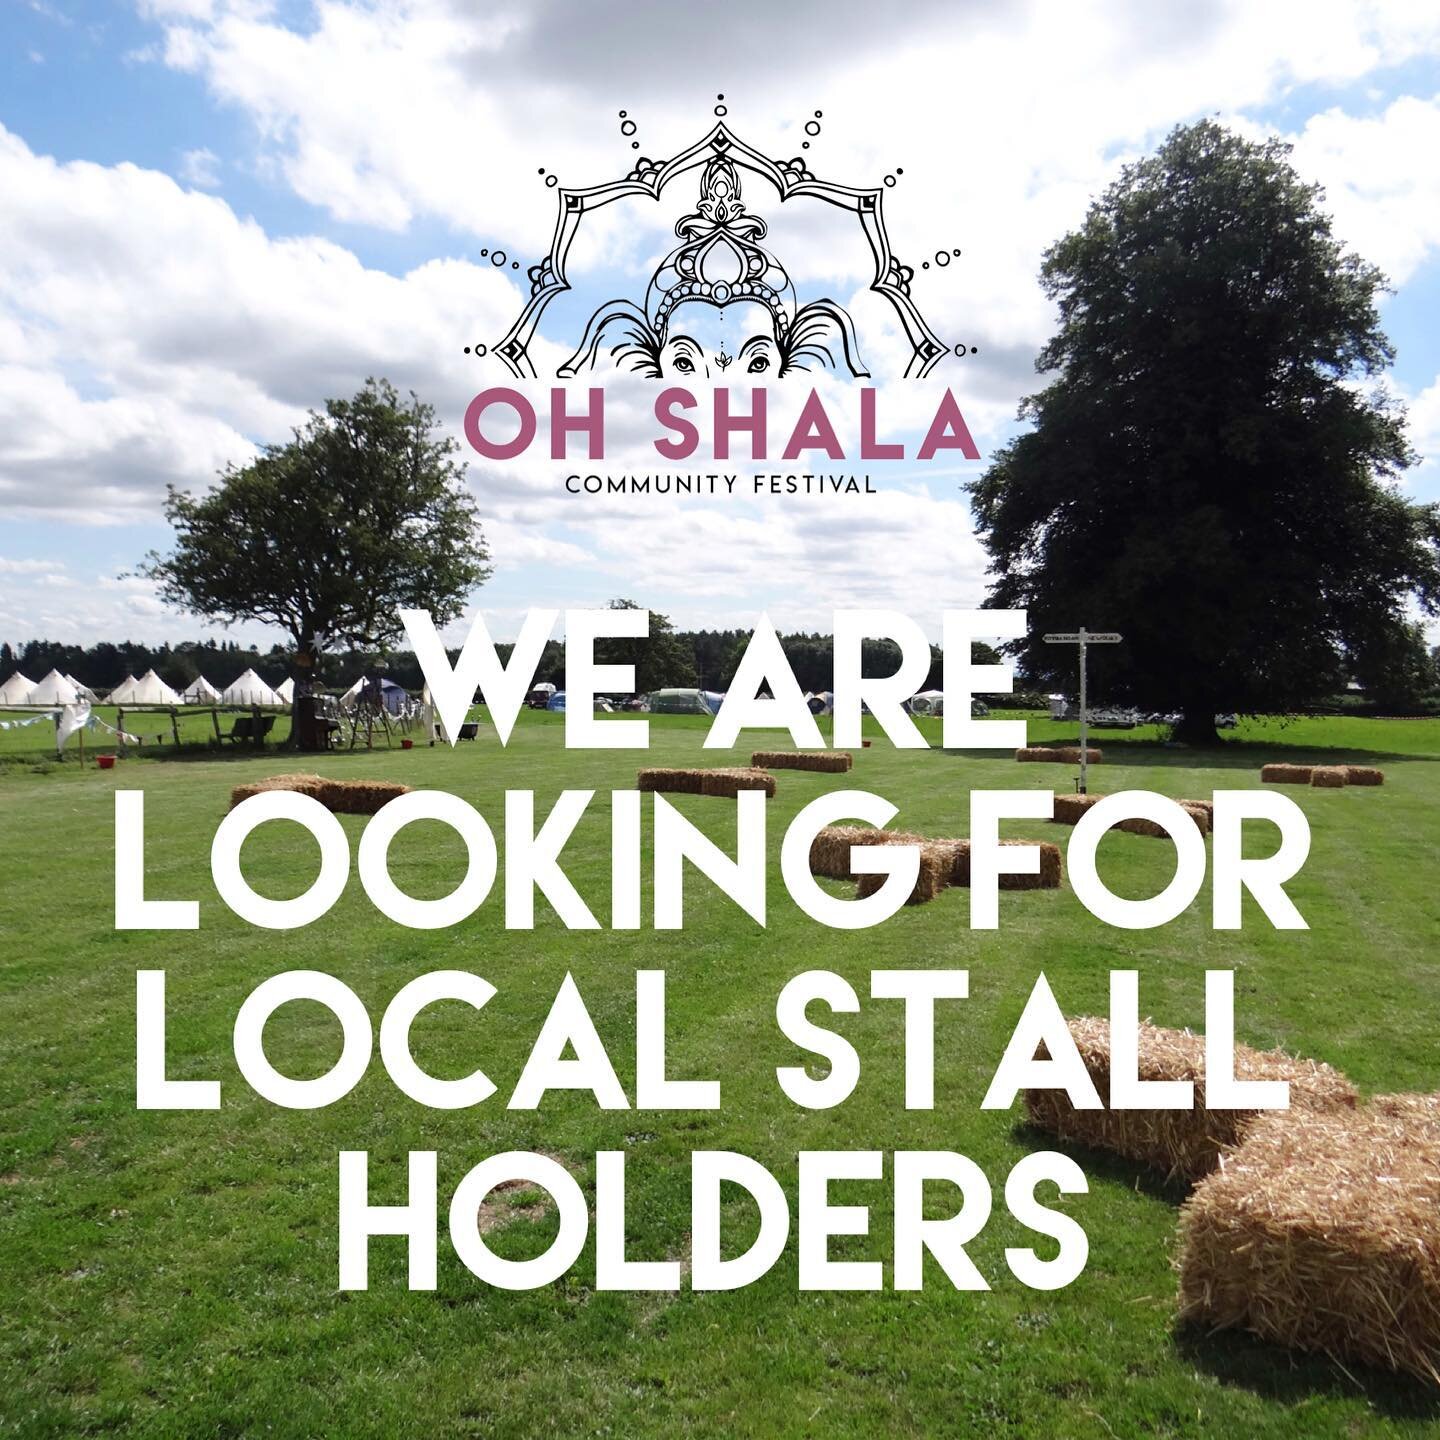 We are opening applications for stall holders local to Bucks and Berks to have a stall at Oh Shala Festival!!
.
Email hello@ohshalafestival.com to apply